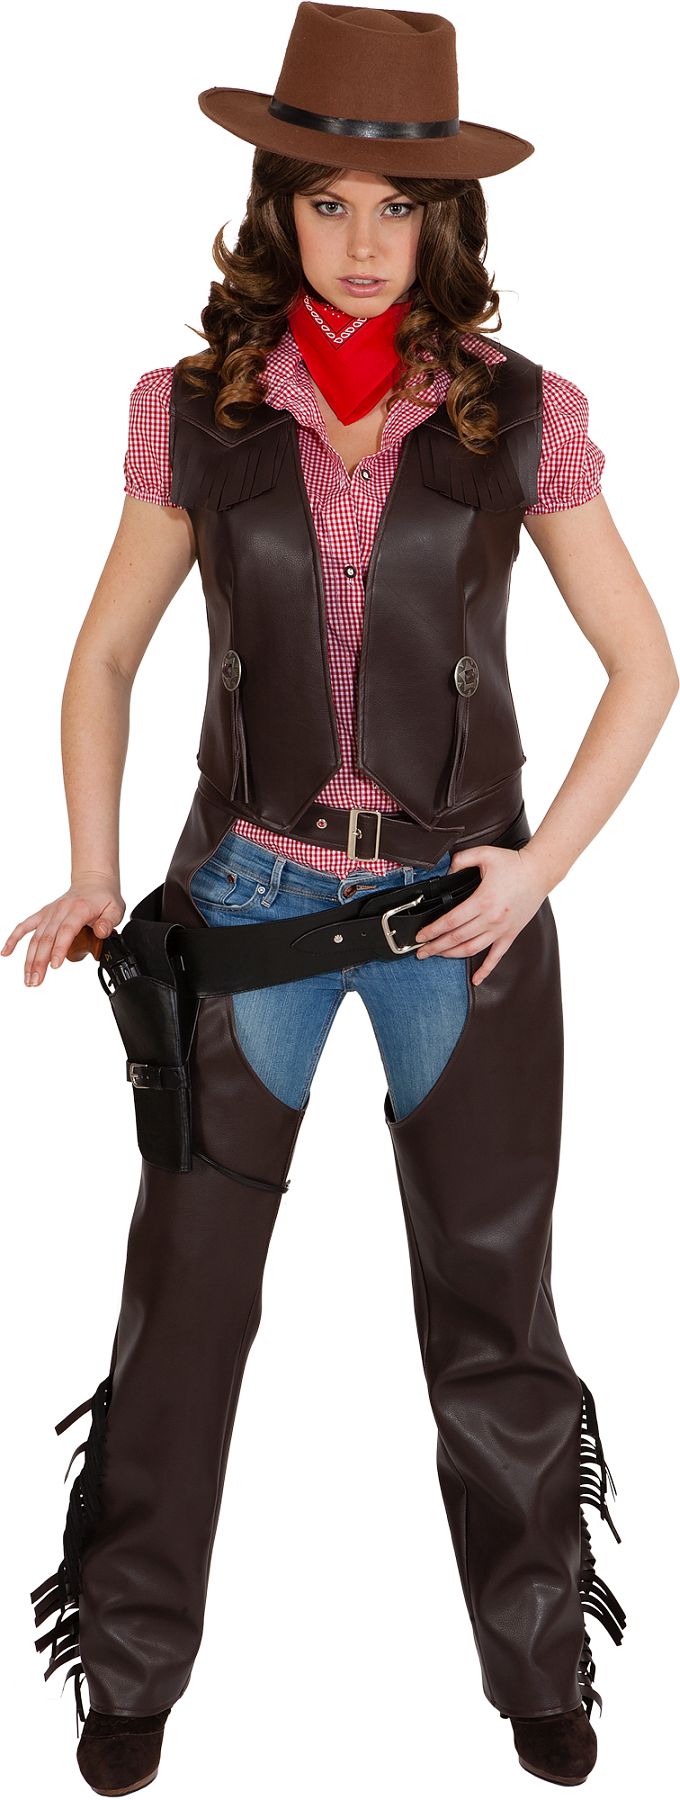 Cowgirl vest, brown